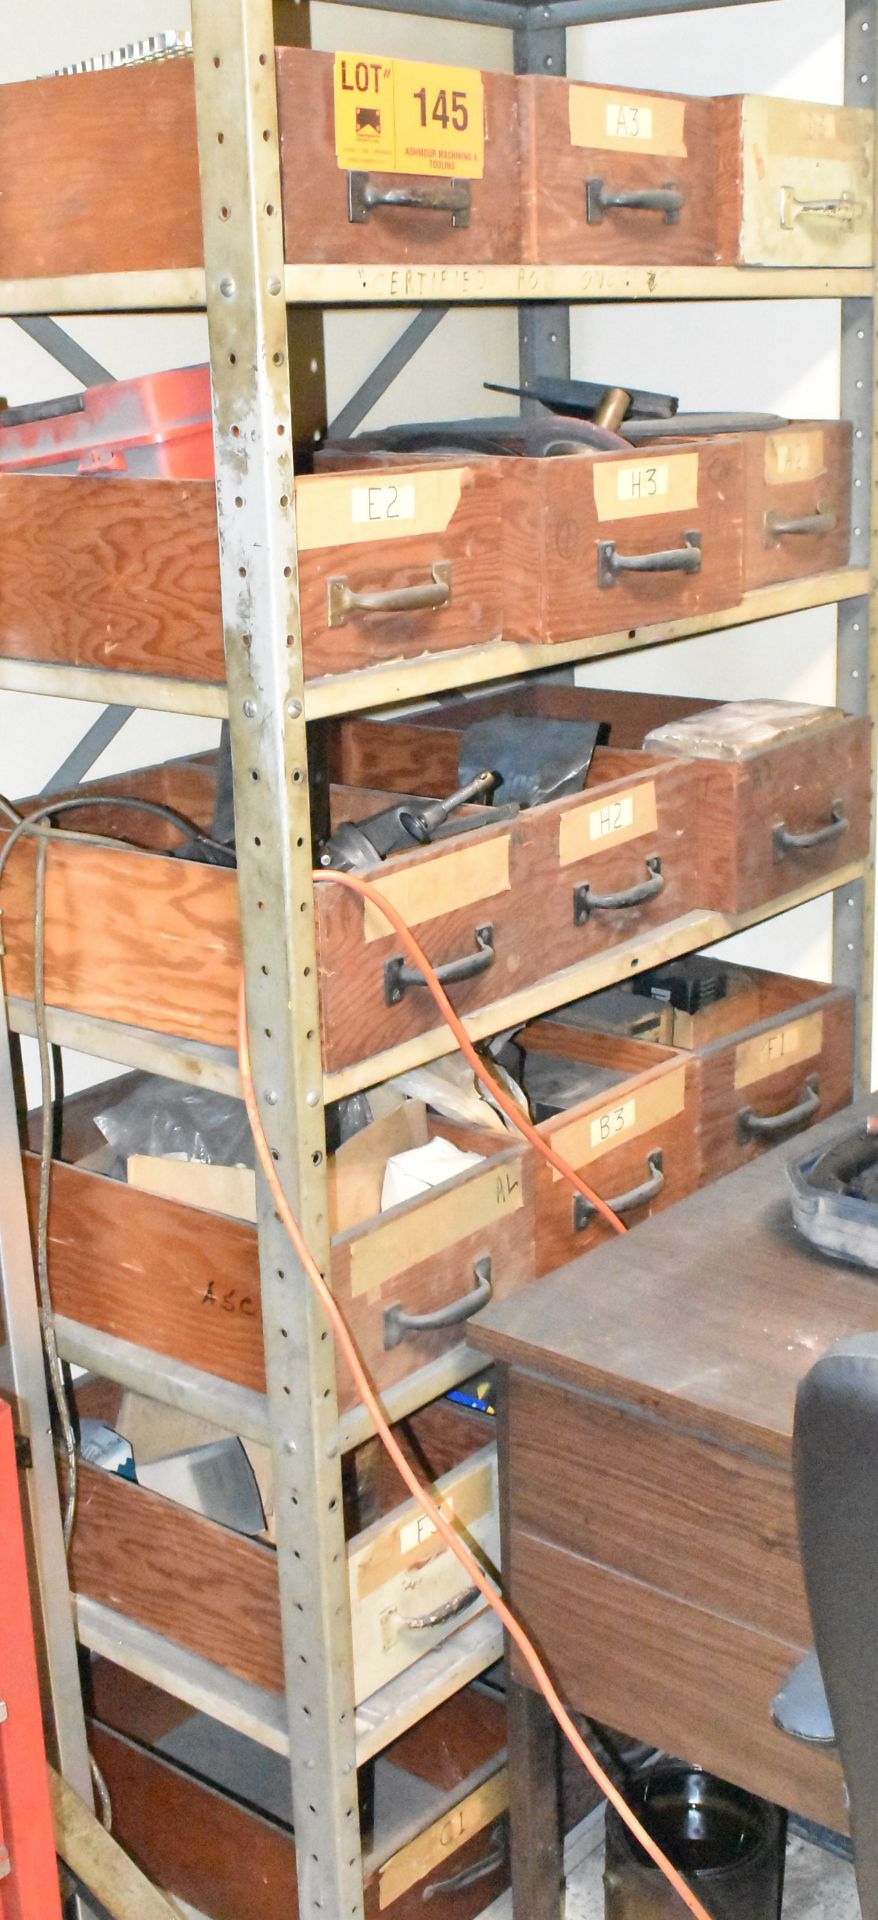 LOT/ STEEL SHELF & DRAWERS WITH CONTENTS - INCLUDING TOOLING, HARDWARE, GRINDING WHEELS & SHOP